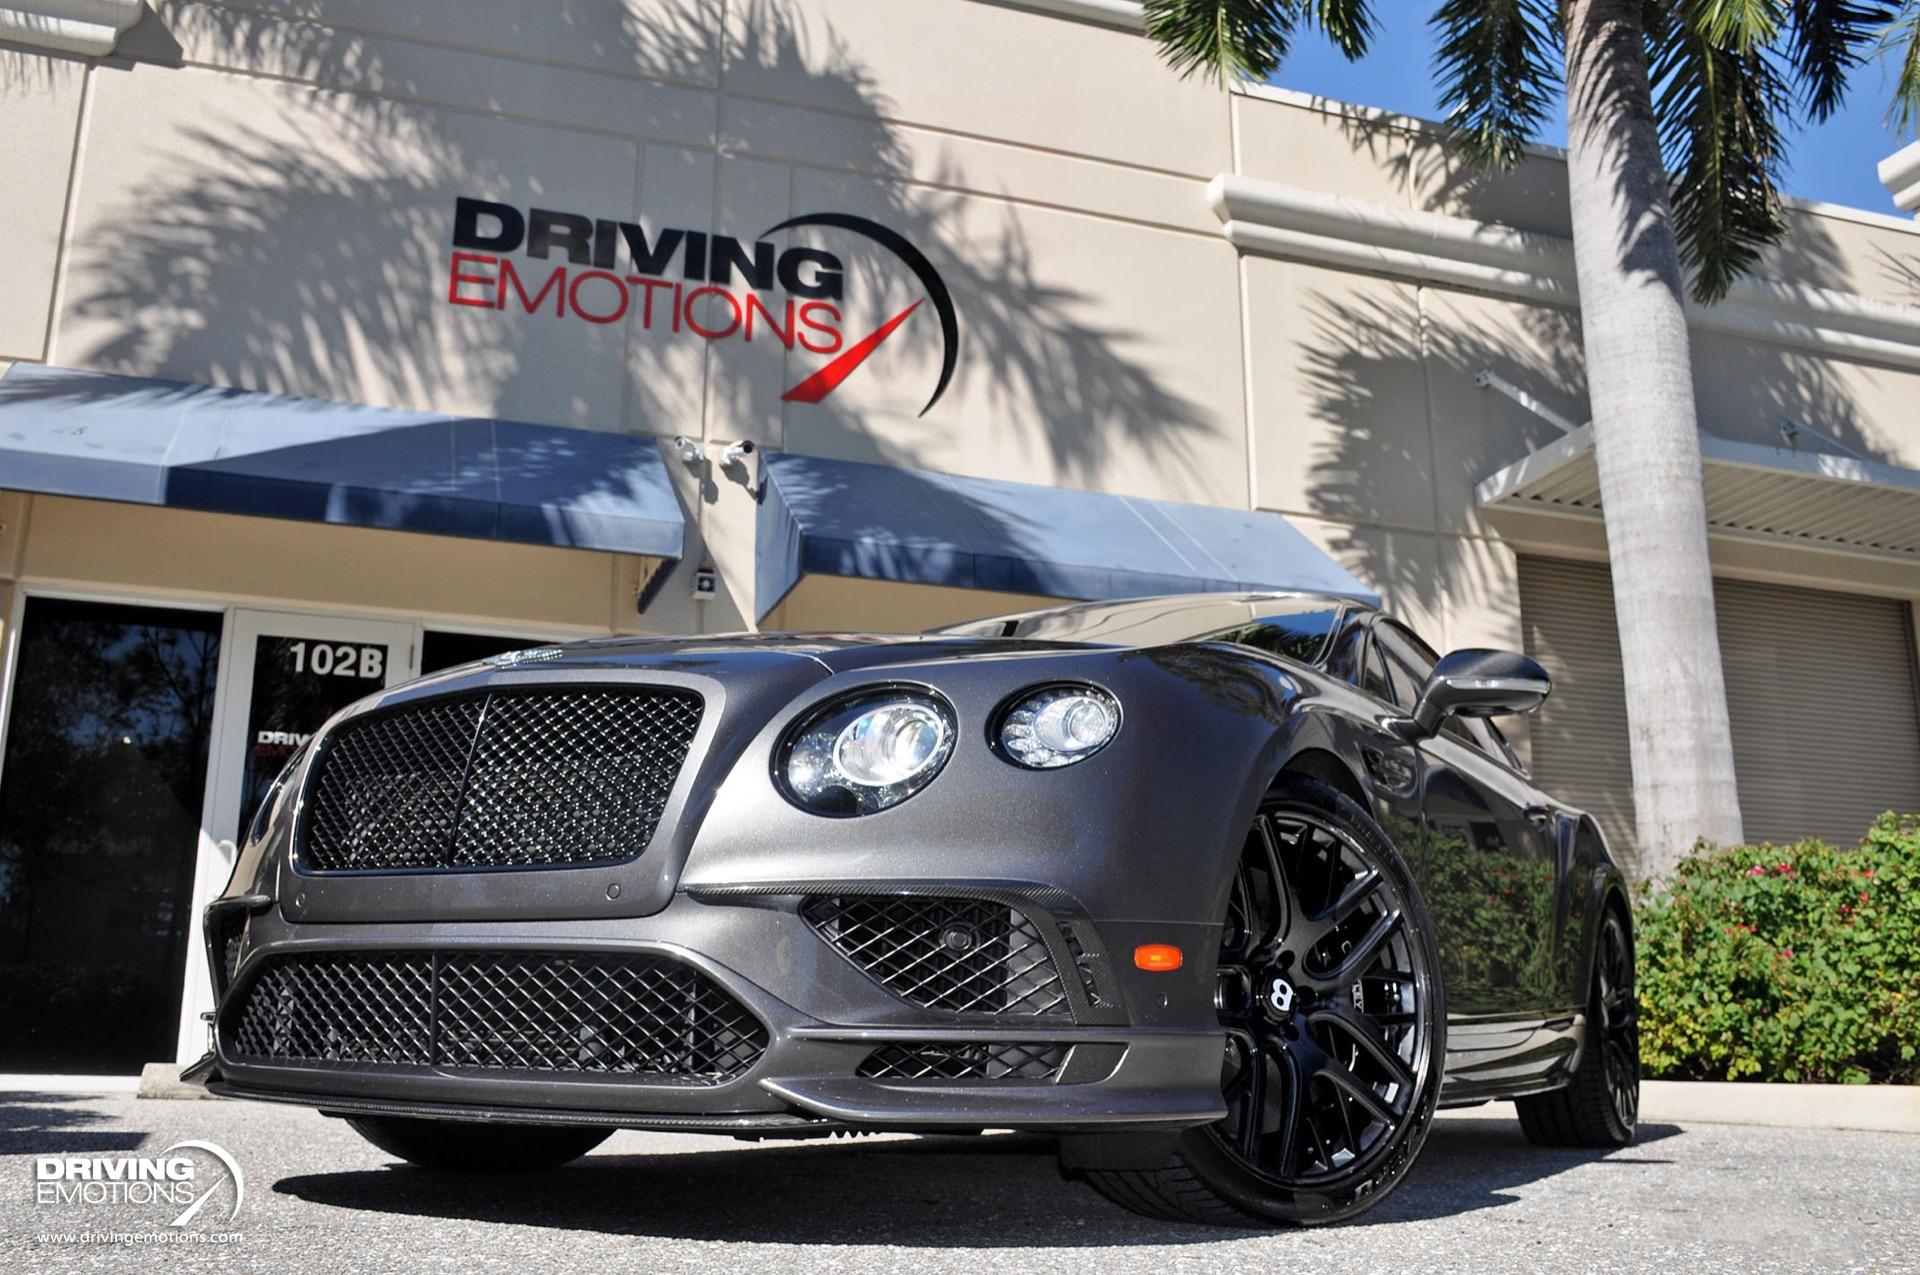 Used 2017 Bentley Continental GT Supersports W12 Supersports 1 OF 710 BUILT! TITANIUM EXHAUST! $332K MSRP!! | Lake Park, FL